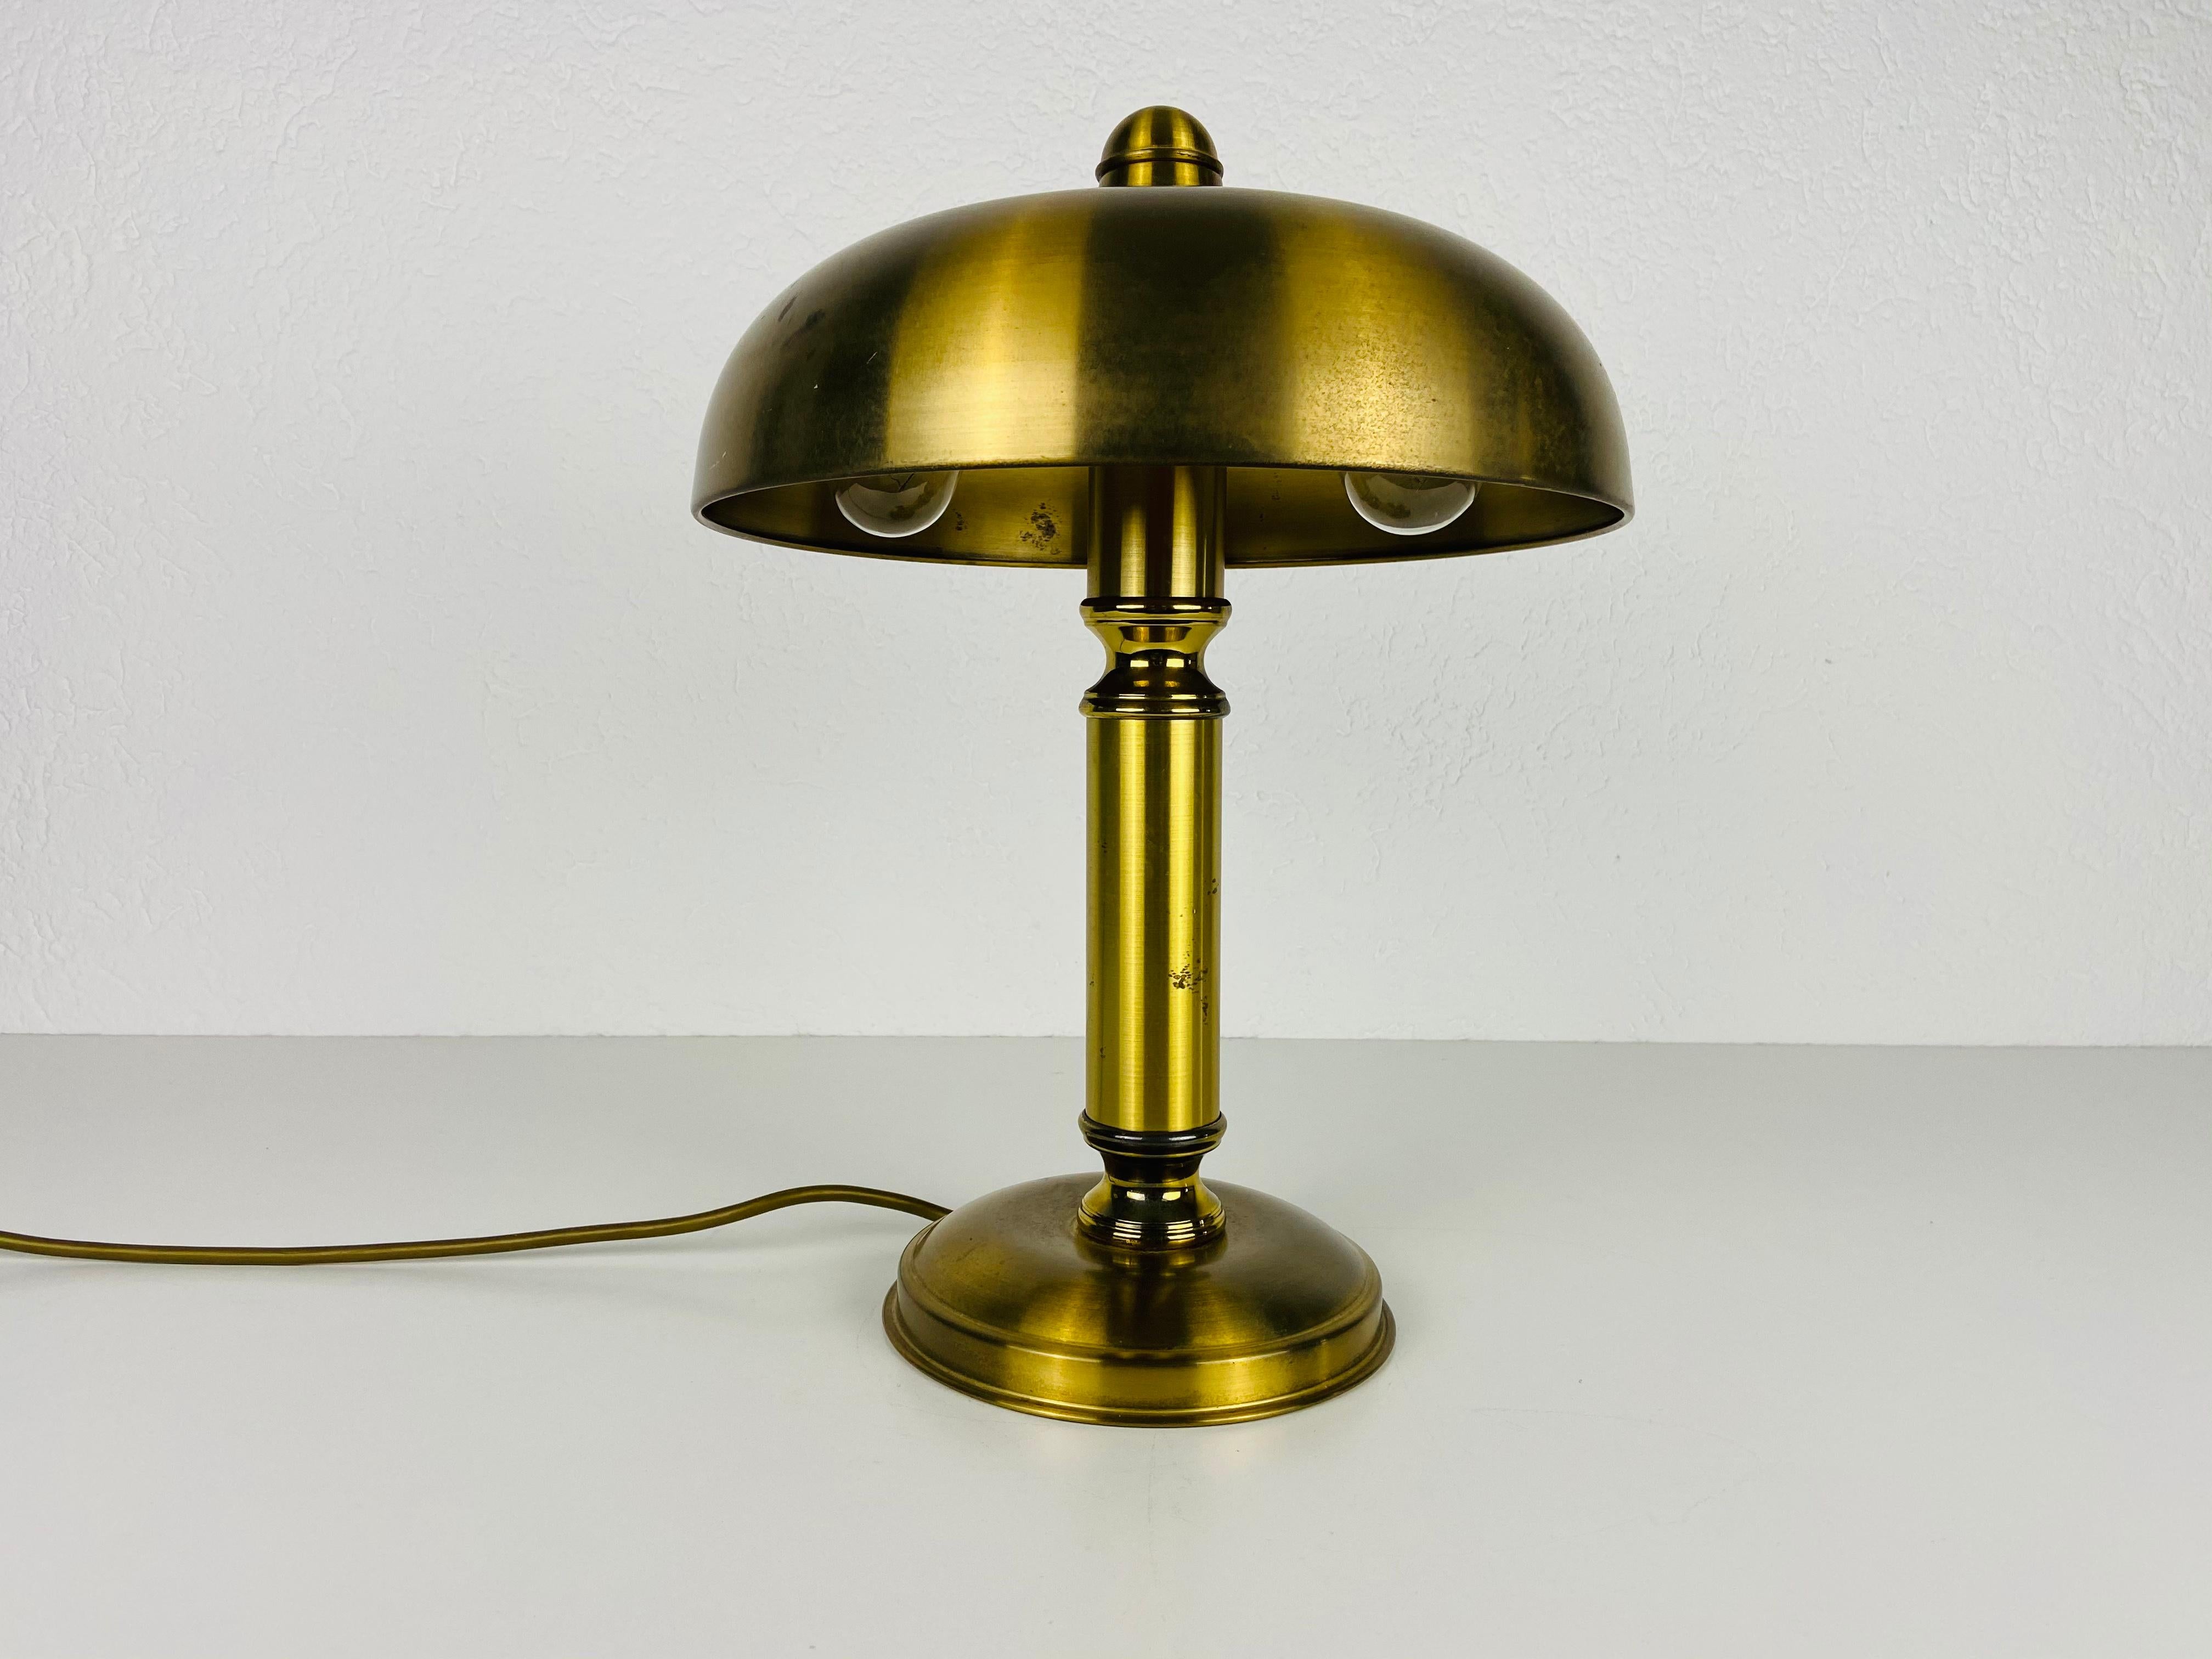 1 of 2 Midcentury Full Brass Table Lamps, 1960s, Germany For Sale 3